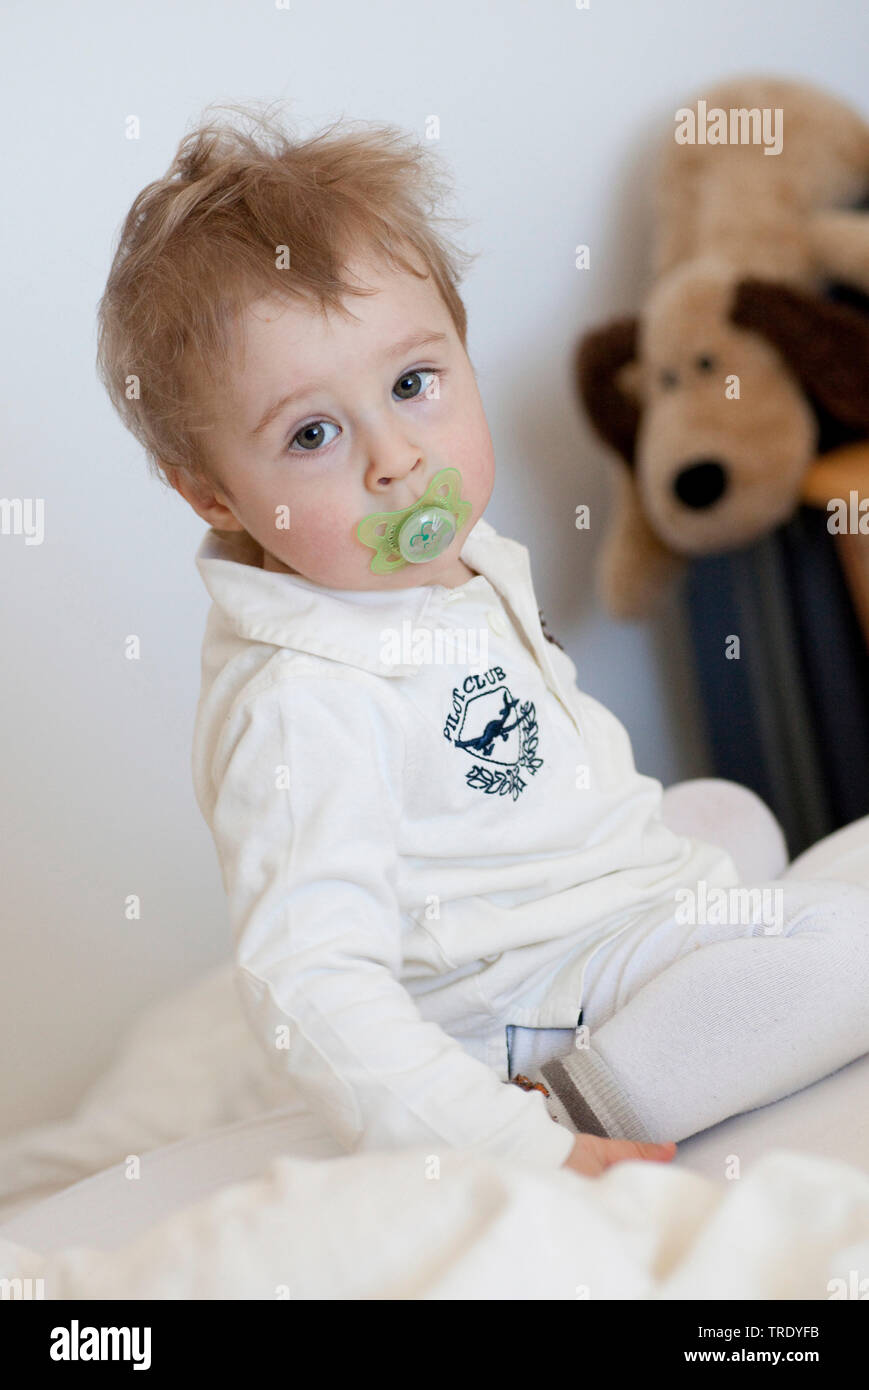 Portrait of a young boy with comforter looking into the camera with a stuffed animal in the background Stock Photo